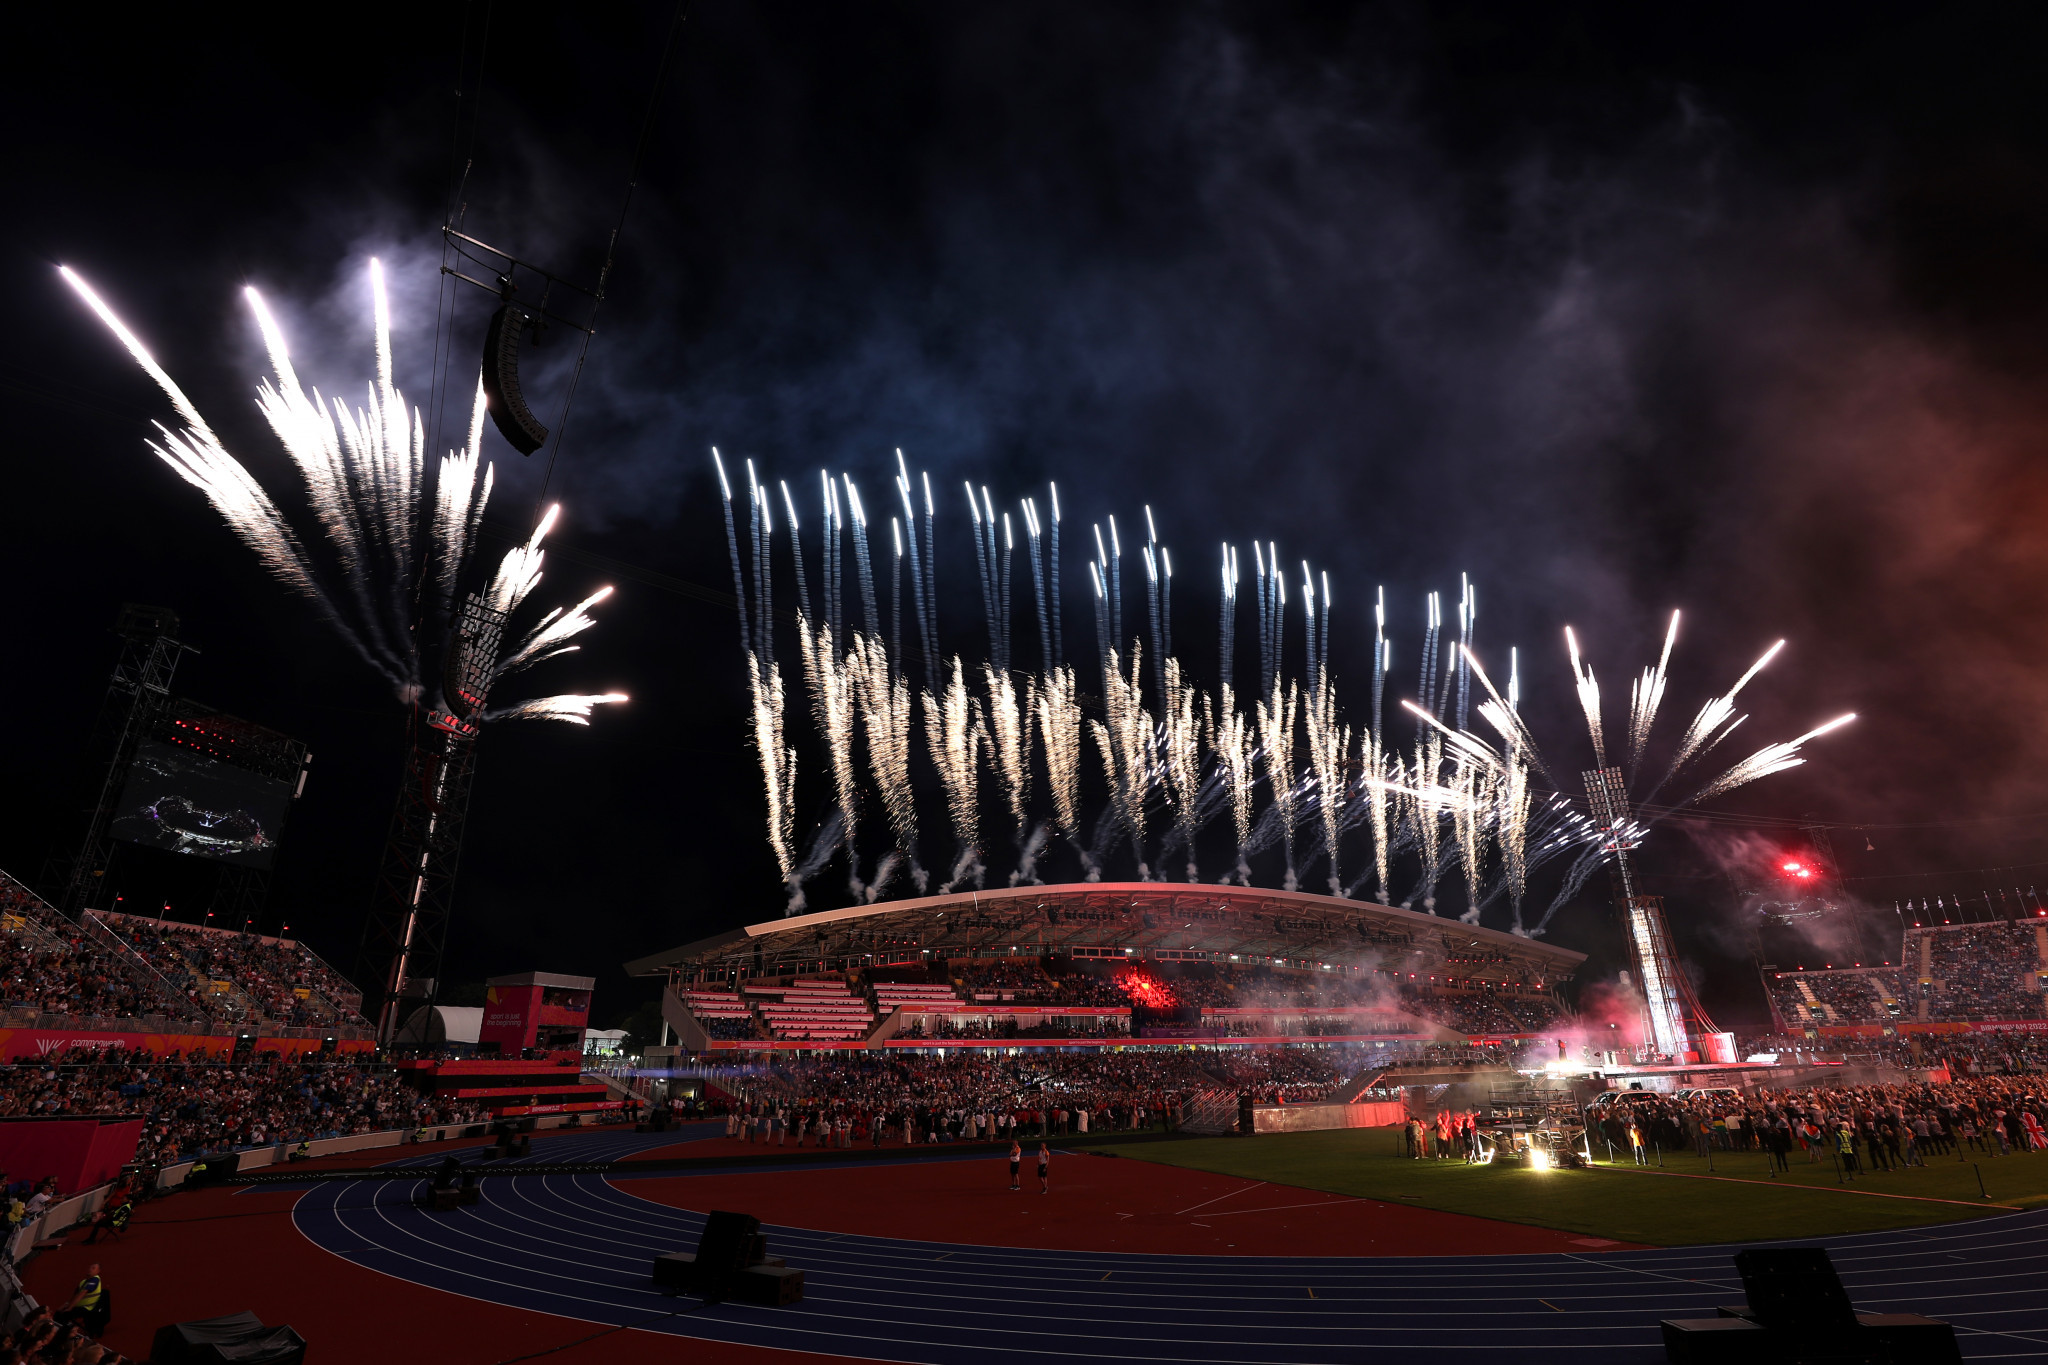 A survey has shown that attention towards Birmingham 2022 grew across Australia, the UK, India, Malaysia and Canada as the Games progressed ©Getty Images